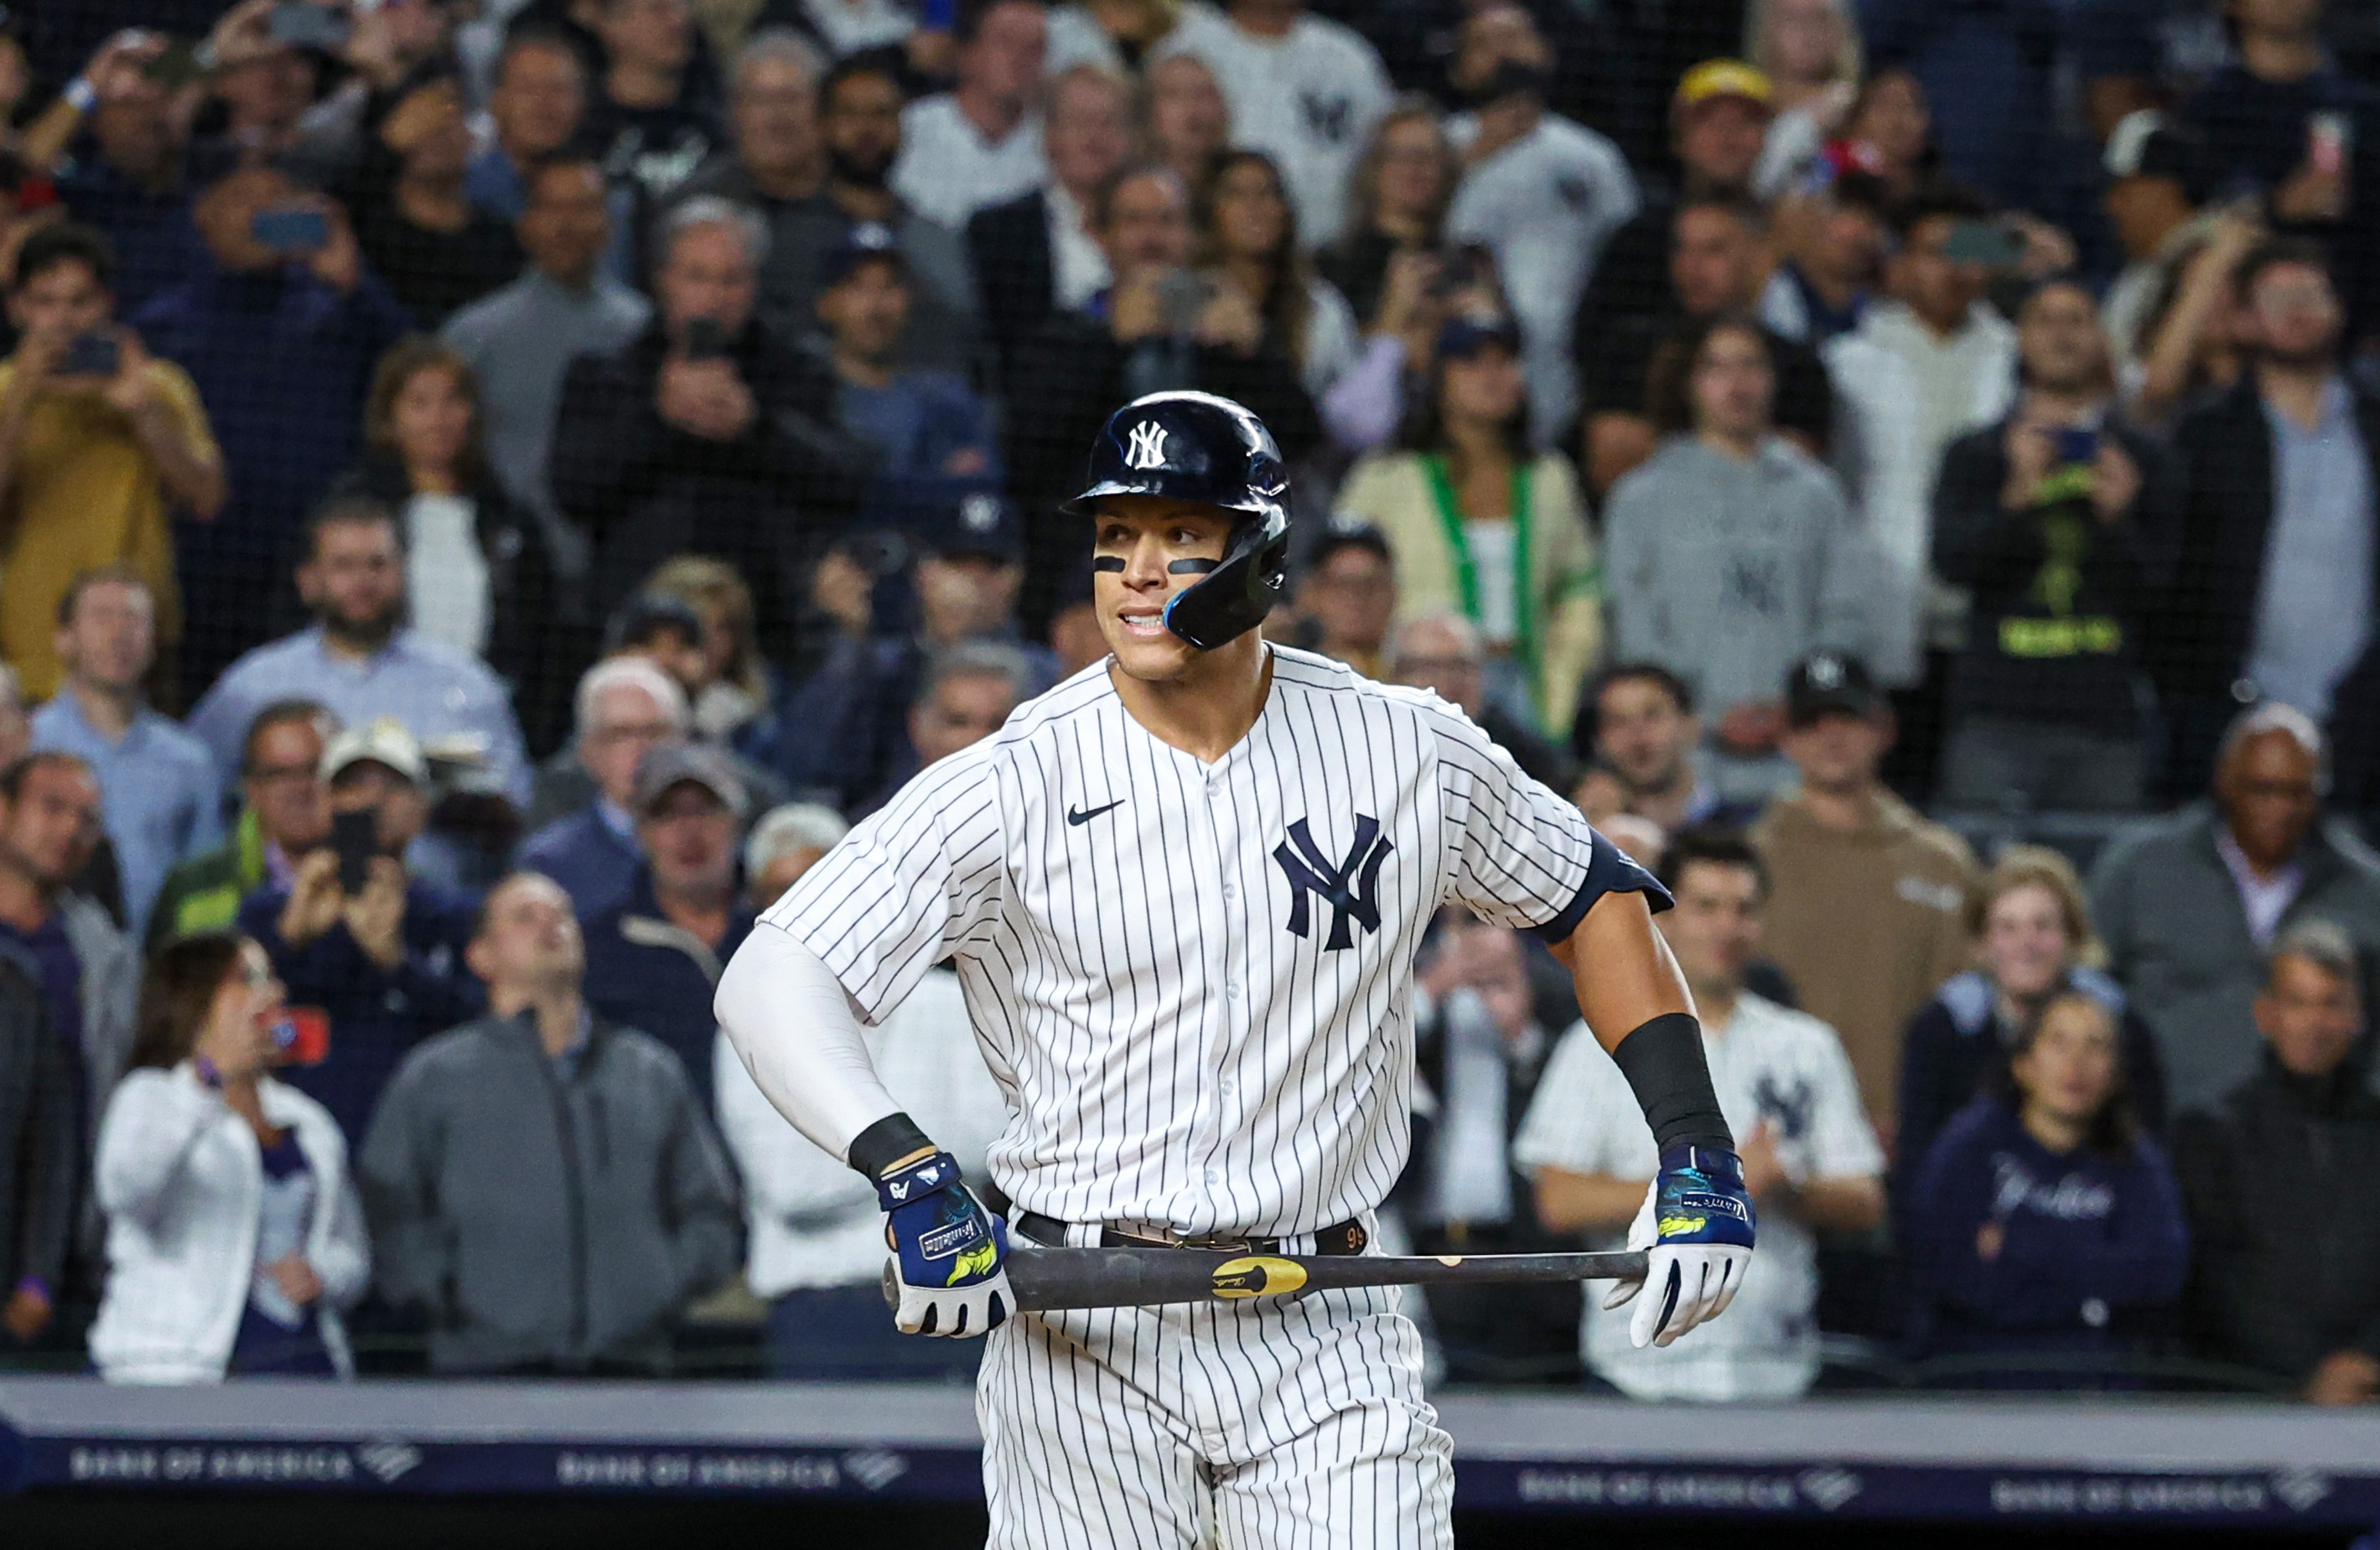 Yankees Aaron Judge goes for home run 61 against Red Sox - nj.com